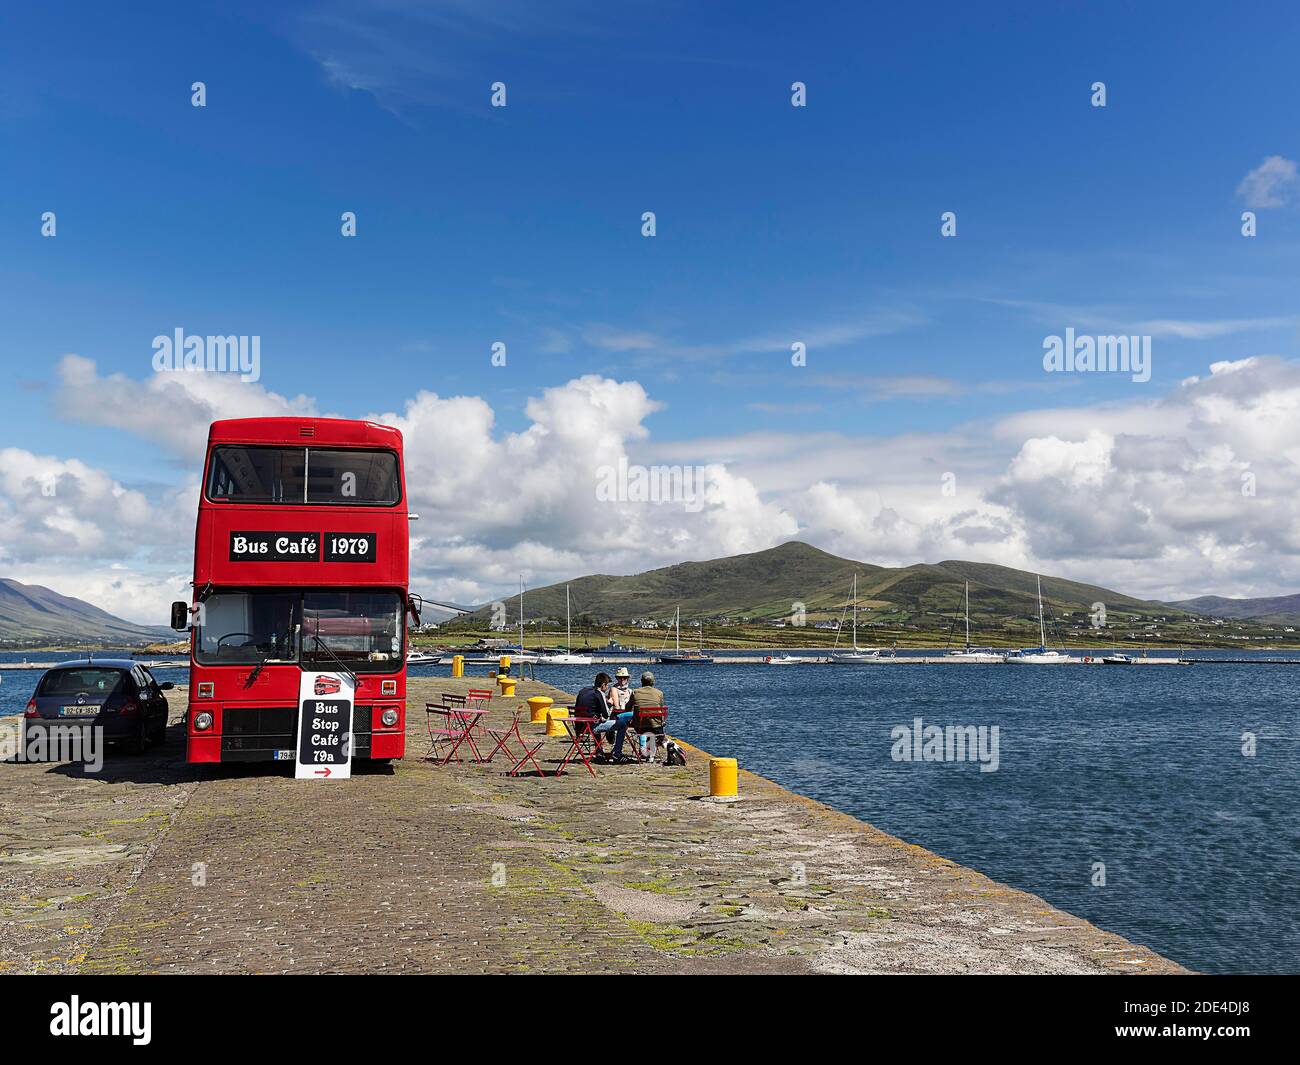 Cafe in a red double-decker bus, Bus Stop Cafe, Knightstown, Valentia Island, Coastal road Skellig Ring, Iveragh Peninsula, Wild Atlantic Way Stock Photo